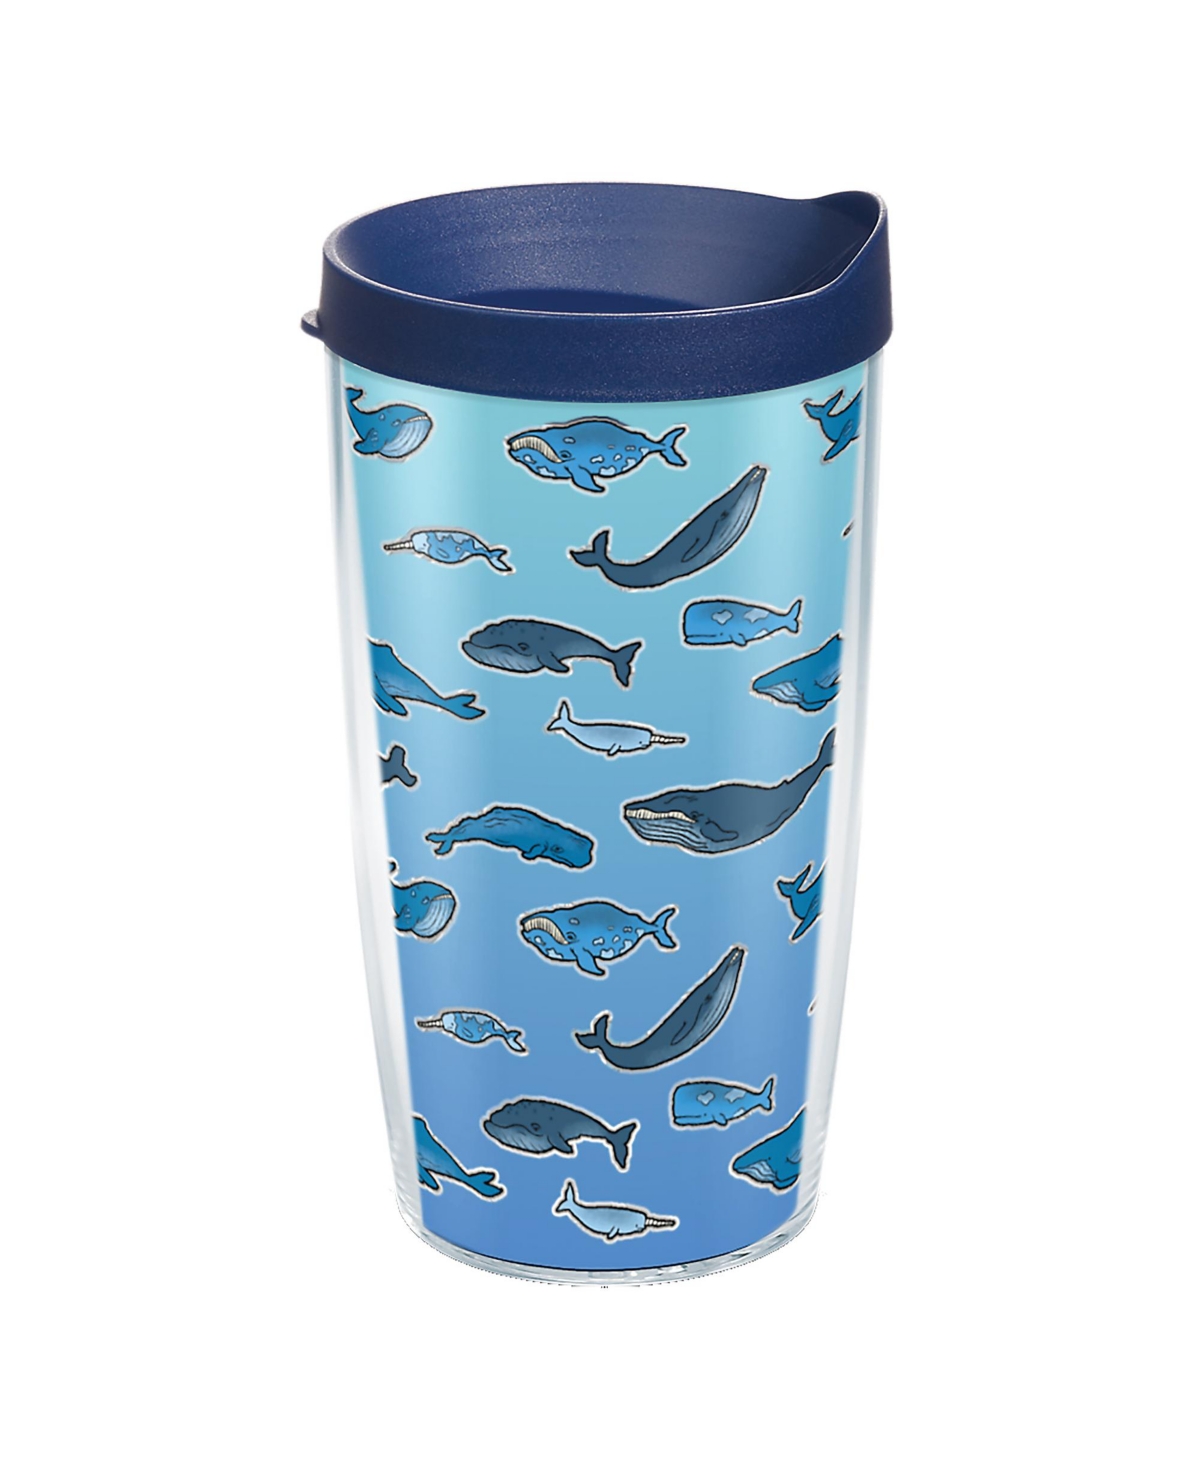 Tervis Tumbler Tervis Whale Tail Made In Usa Double Walled Insulated Tumbler Travel Cup Keeps Drinks Cold & Hot, 16 In Open Miscellaneous